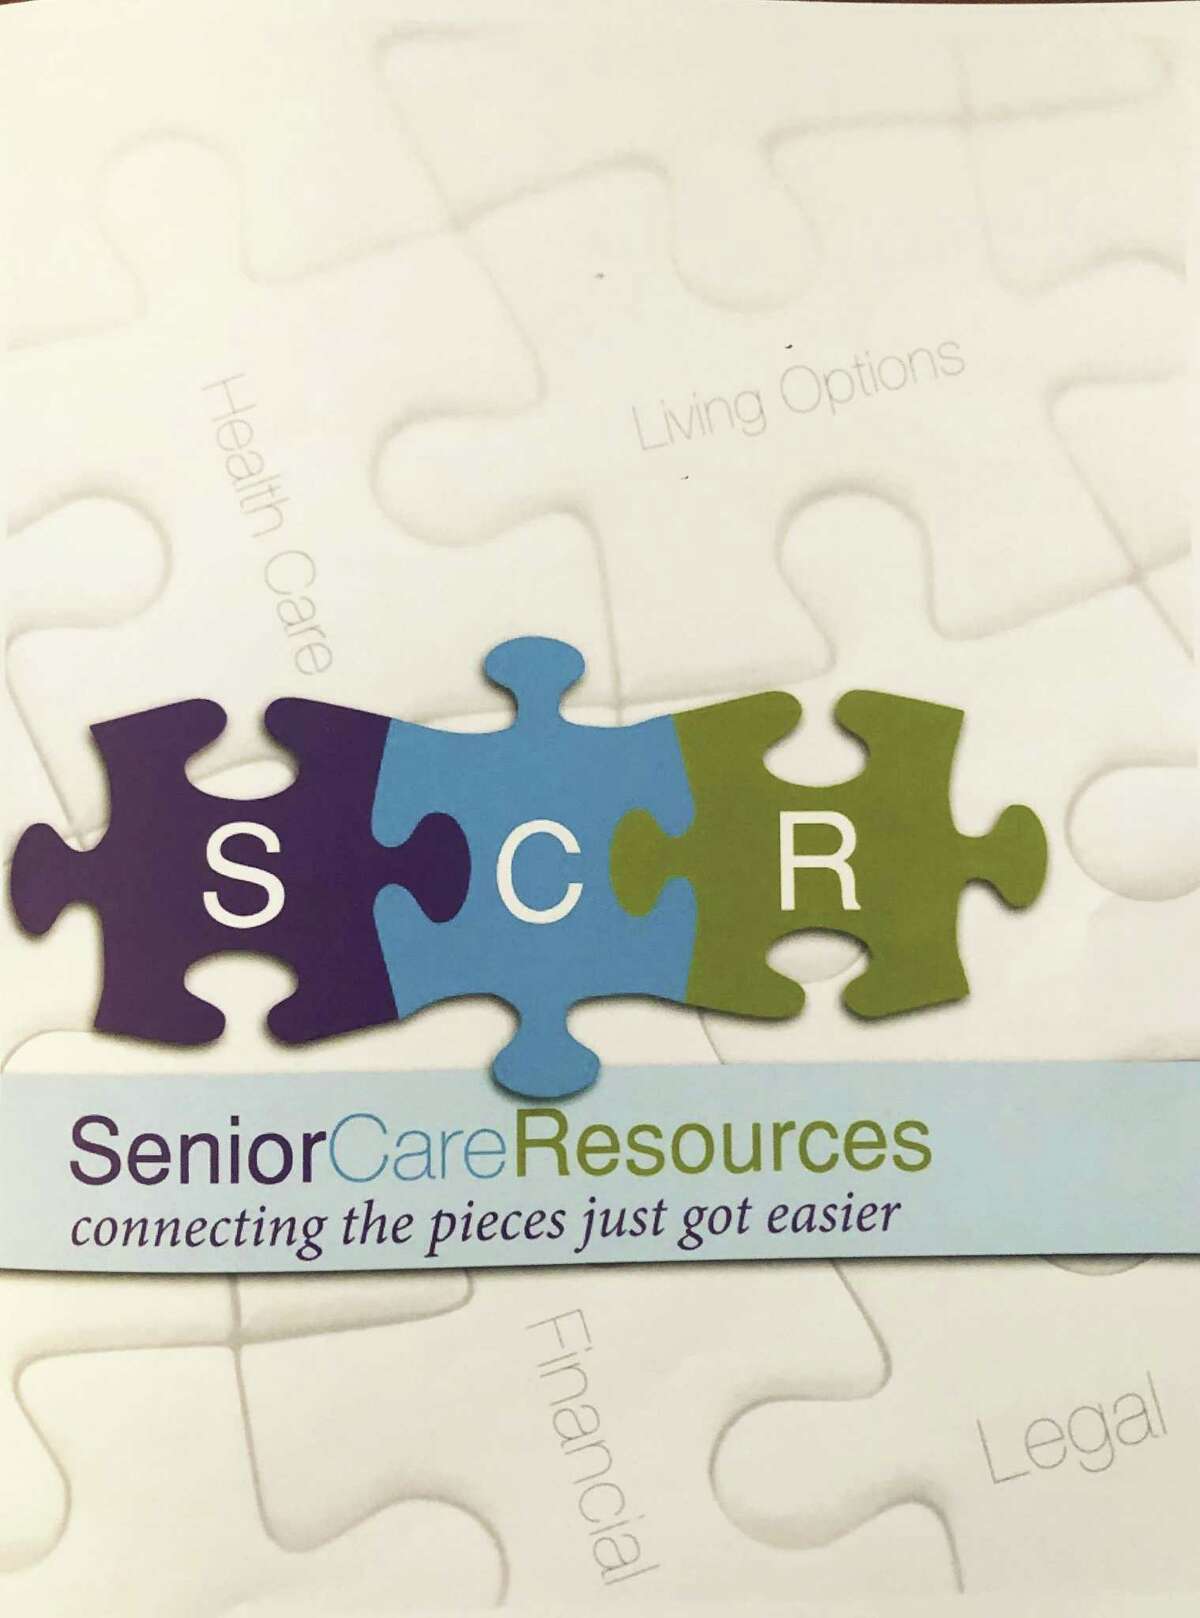 The Senior Care Resources of Western Connecticut group in New Milford aims to help elder individuals and their families plan for their futures.